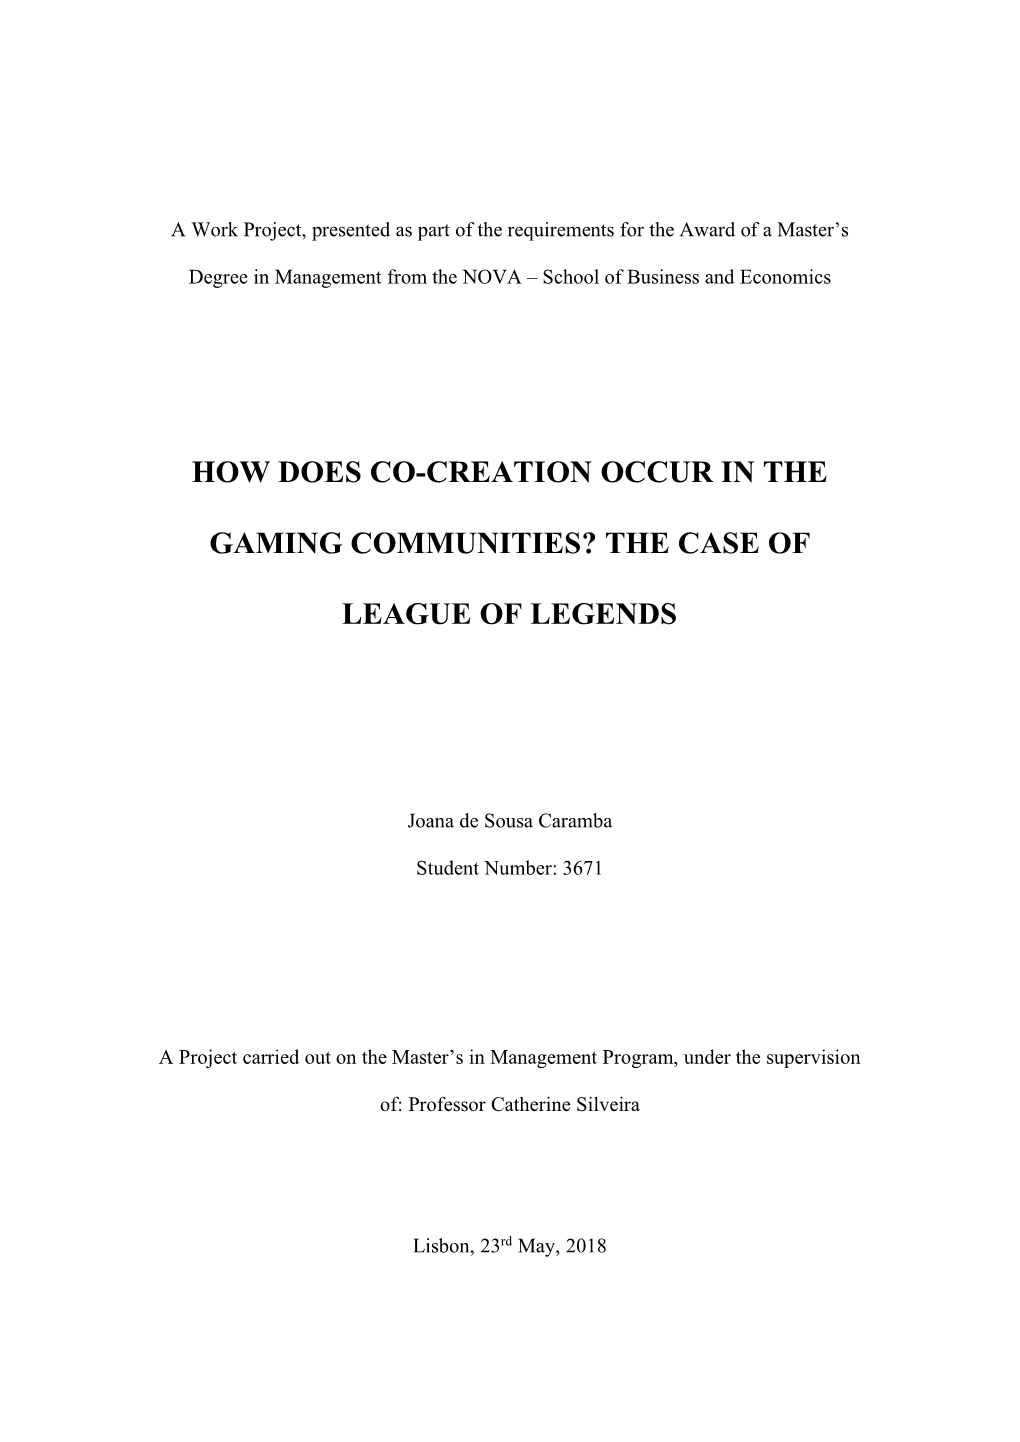 How Does Co-Creation Occur in the Gaming